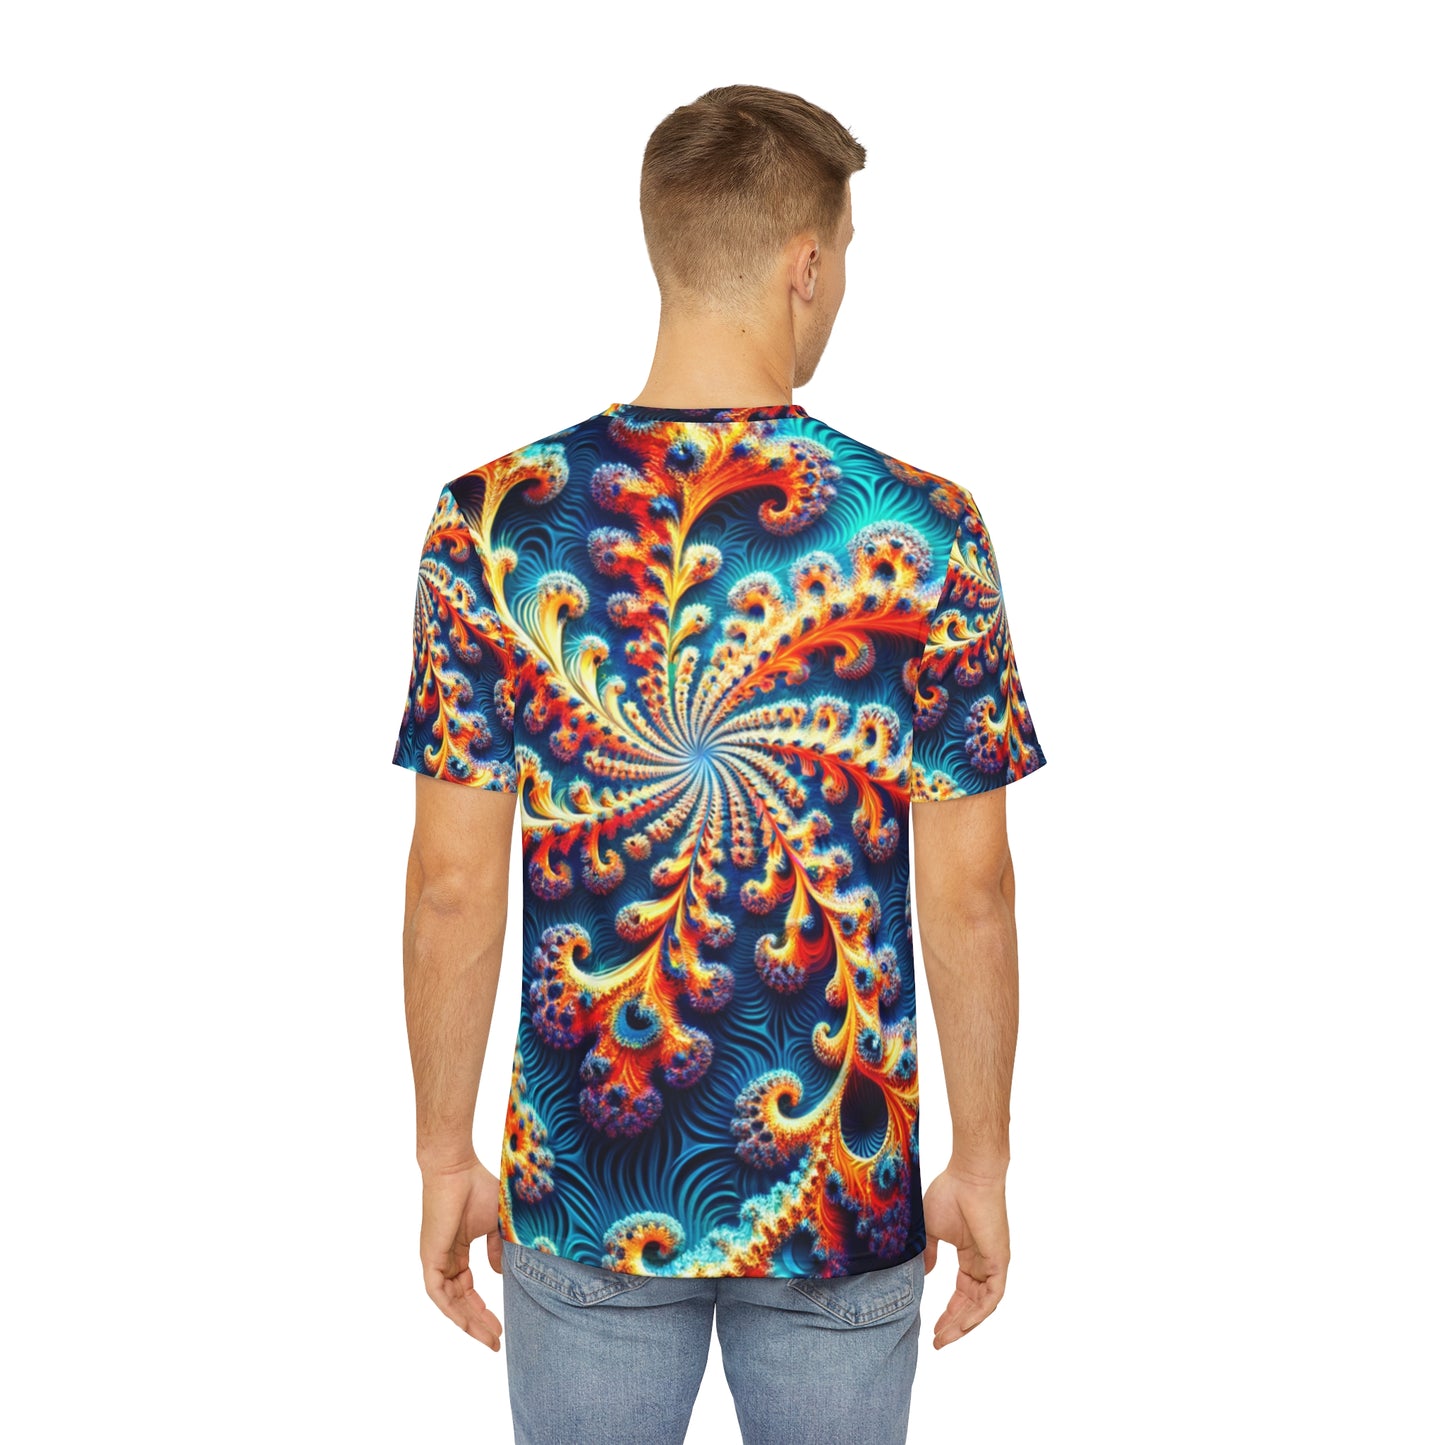 Back view of the Iridescent Nautilus Swirls Crewneck Pullover All-Over Print Short-Sleeved Shirt blue red yellow orange green swirl pattern paired with casual denim pants worn by a white man